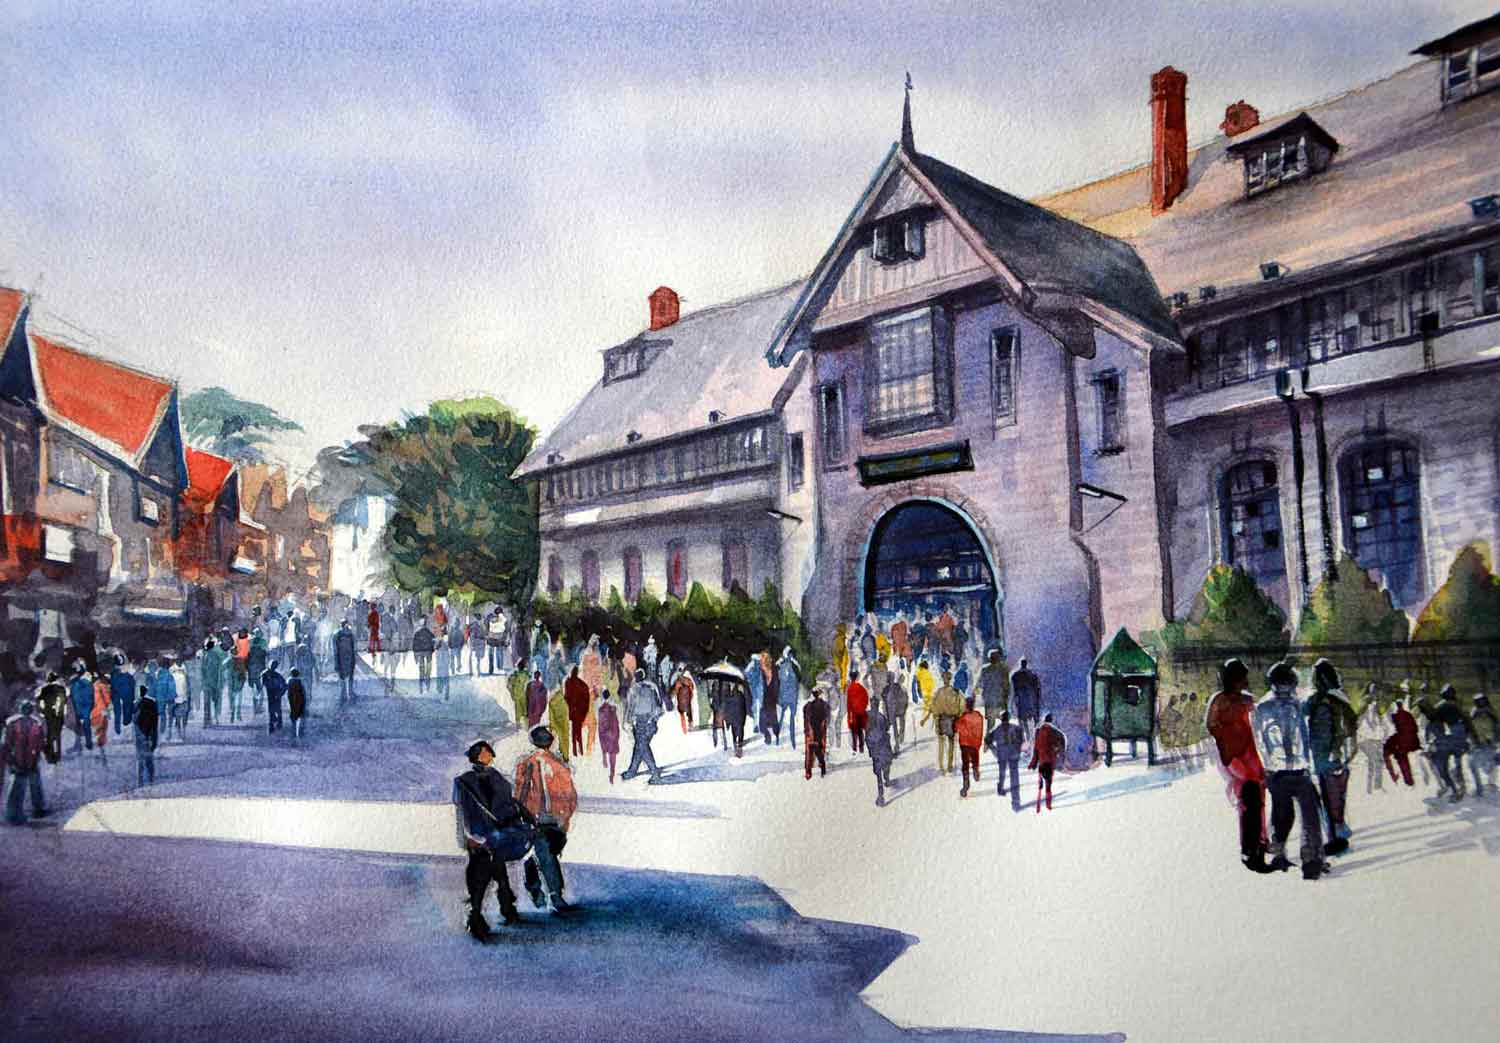 Semi Realistic Painting with Watercolor on Paper "The Mall, Shimla" art by Chaman Sharma